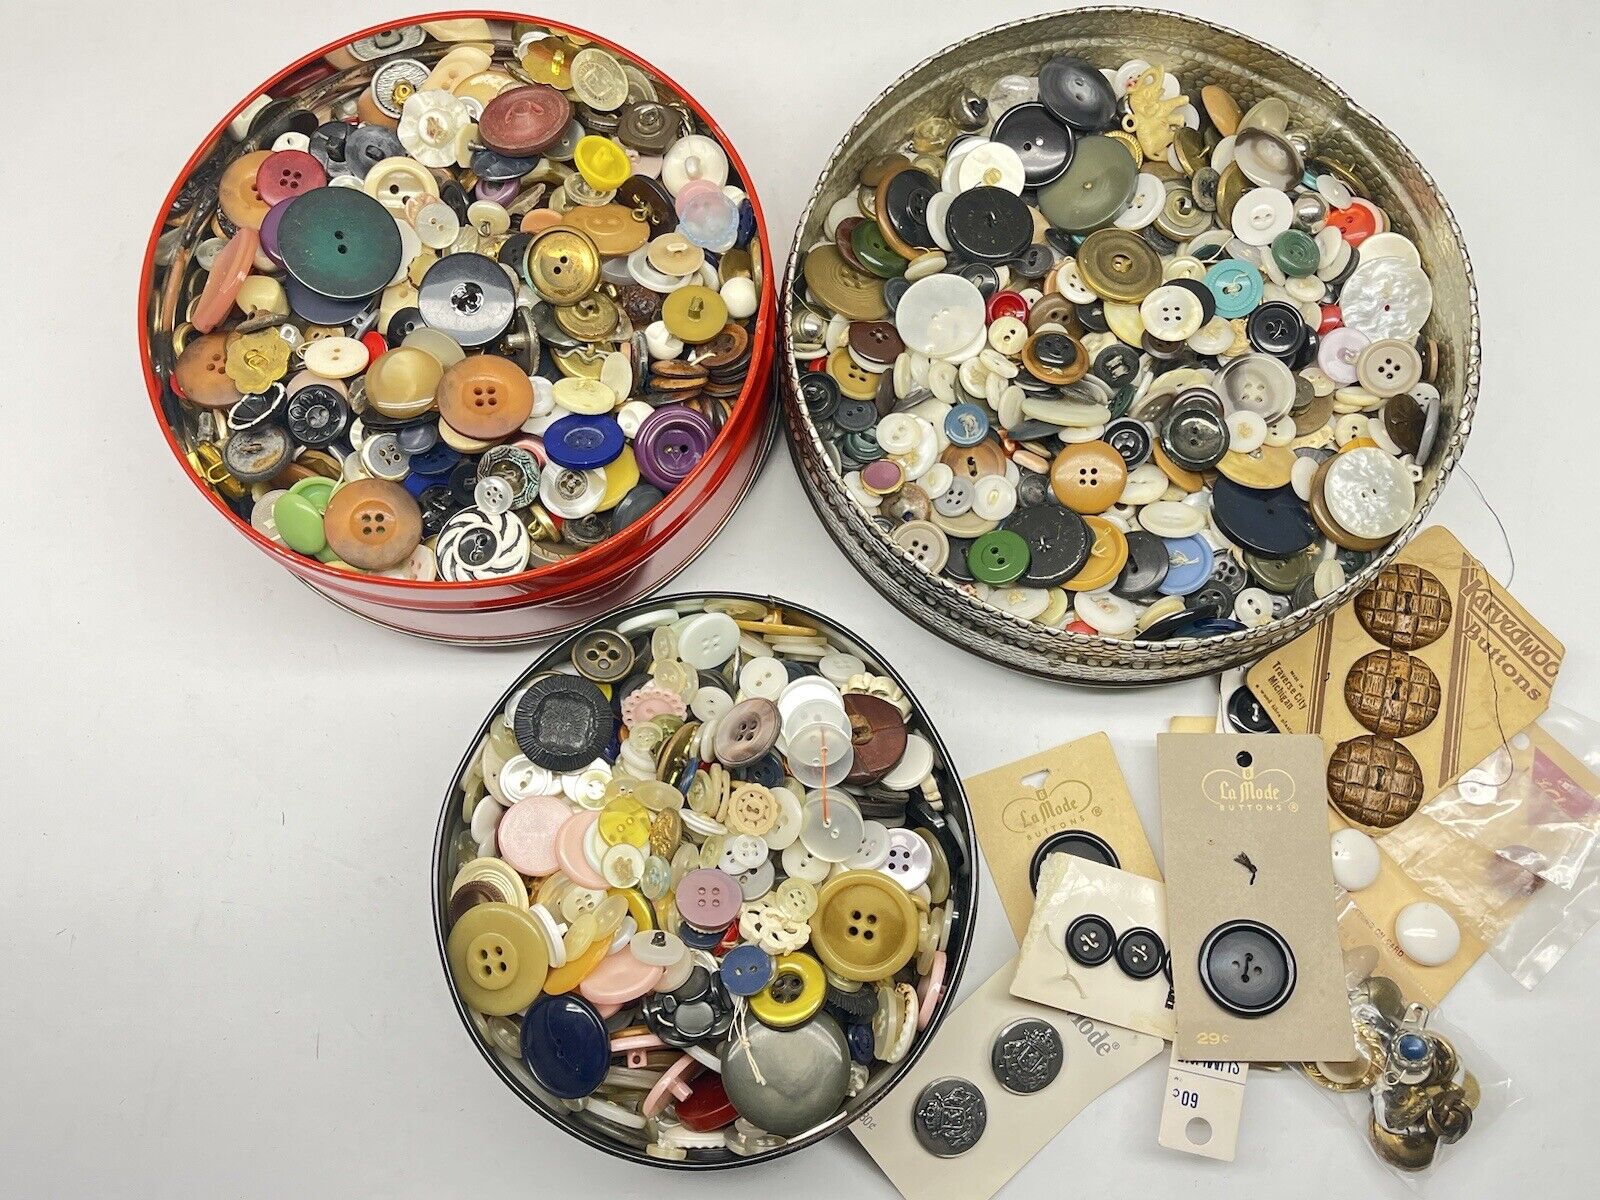 Huge UNSORTED 5 Pound Bulk Lot Vintage Sewing Buttons Brass Musical Military Etc